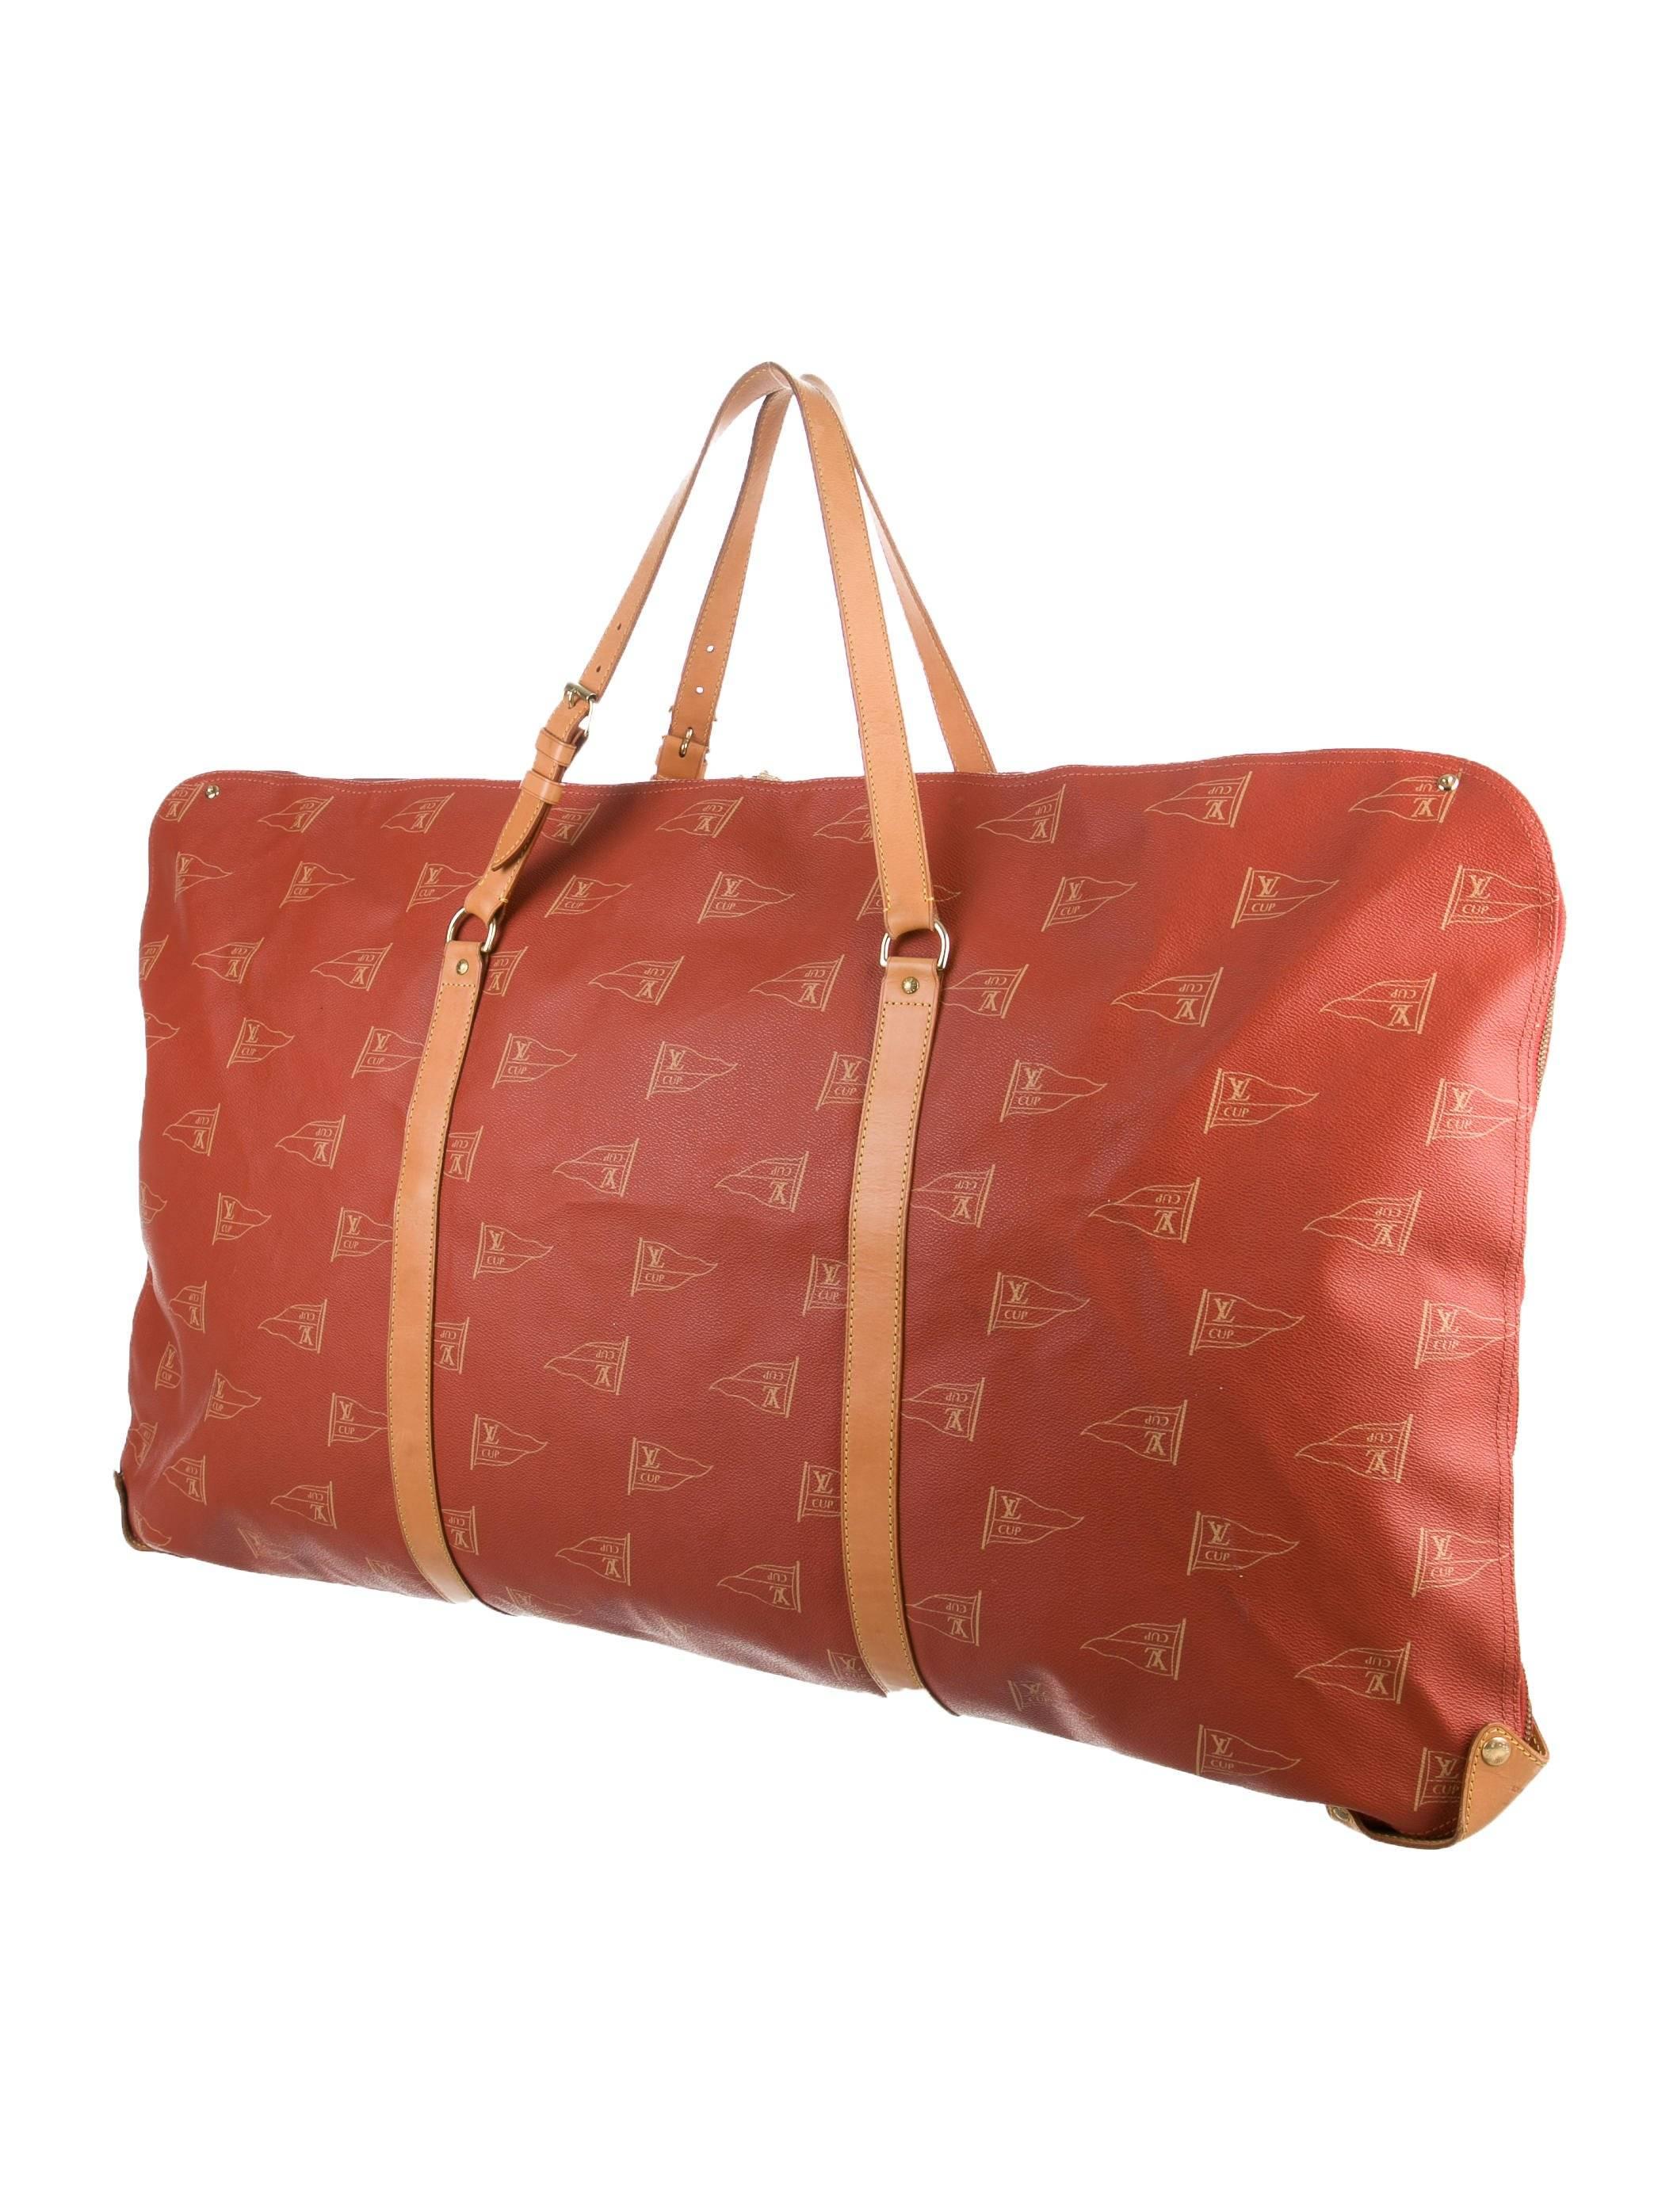 CURATOR'S NOTES

Louis Vuitton Limited Edition Top Handle Men's Travel Weekender Duffle Tote Bag

Monogram canvas
Leather 
Brass hardware
Woven lining
Zip closure 
Date code present
Made in France
Shoulder strap drop 10